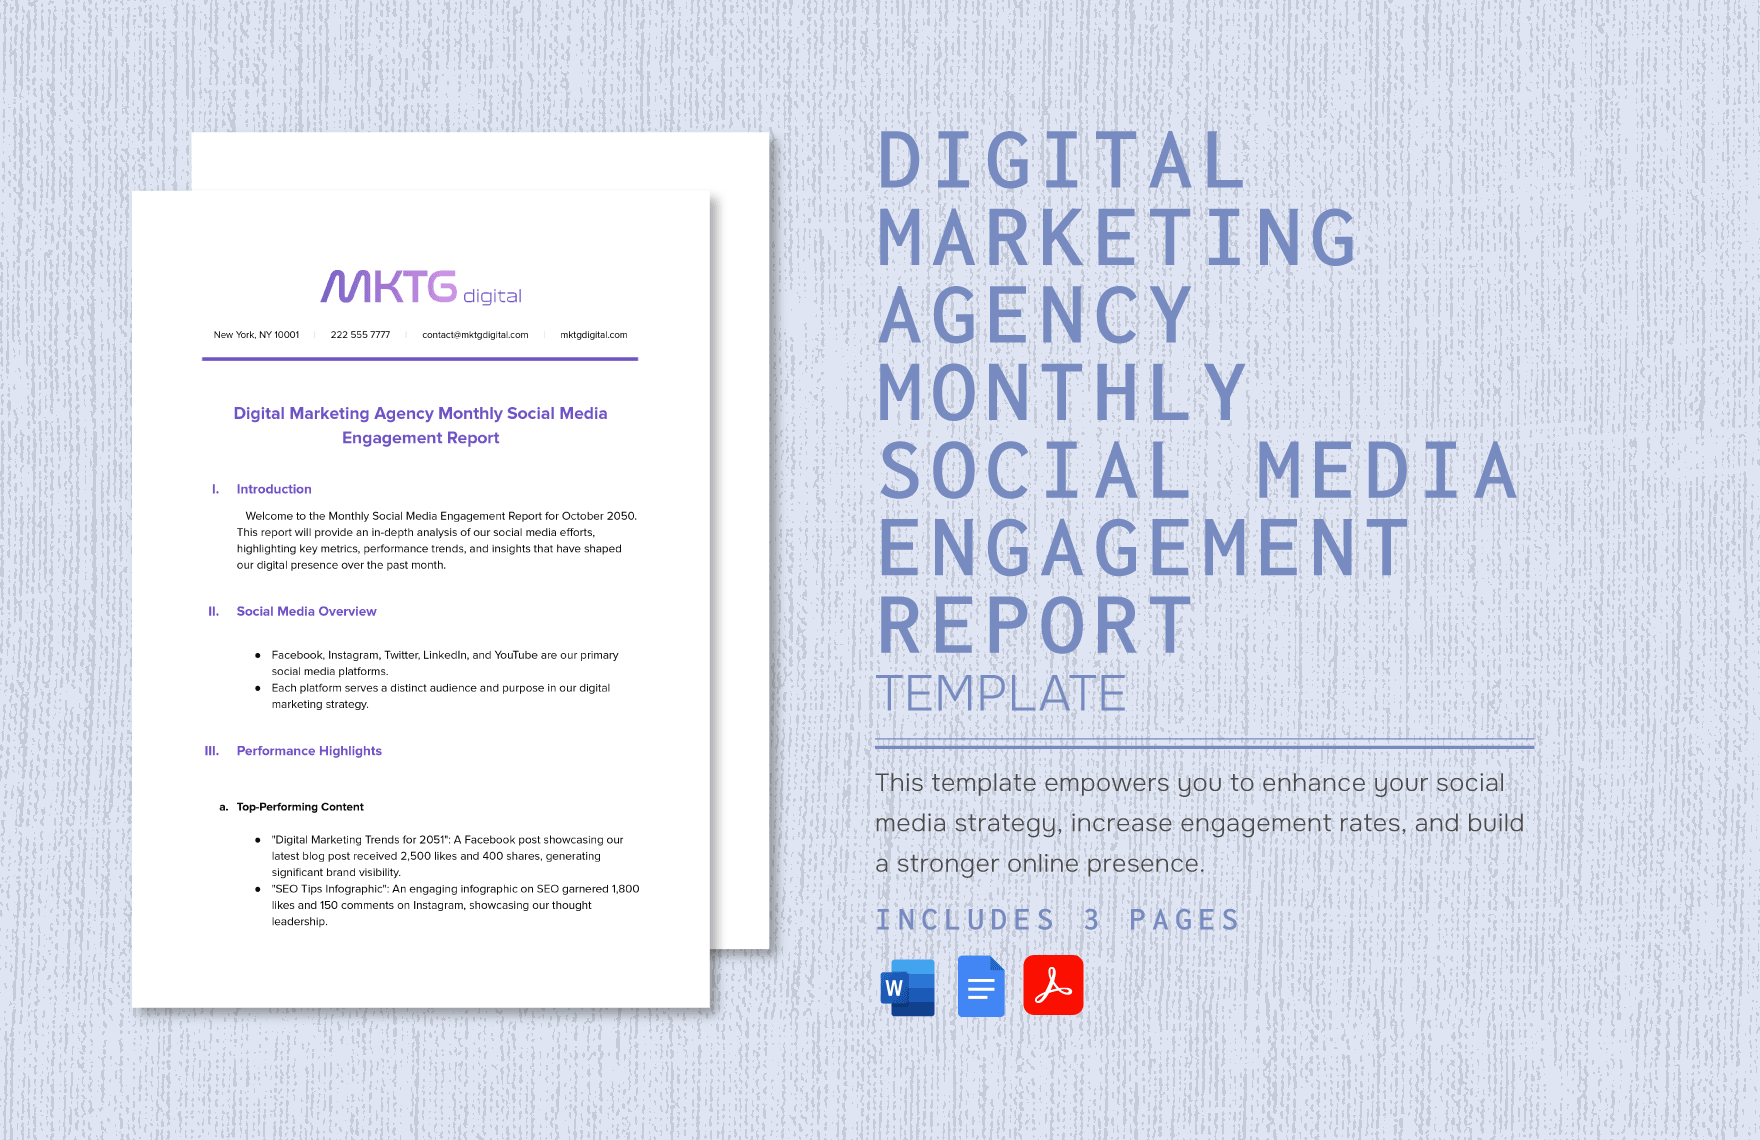 Digital Marketing Agency Monthly Social Media Engagement Report Template